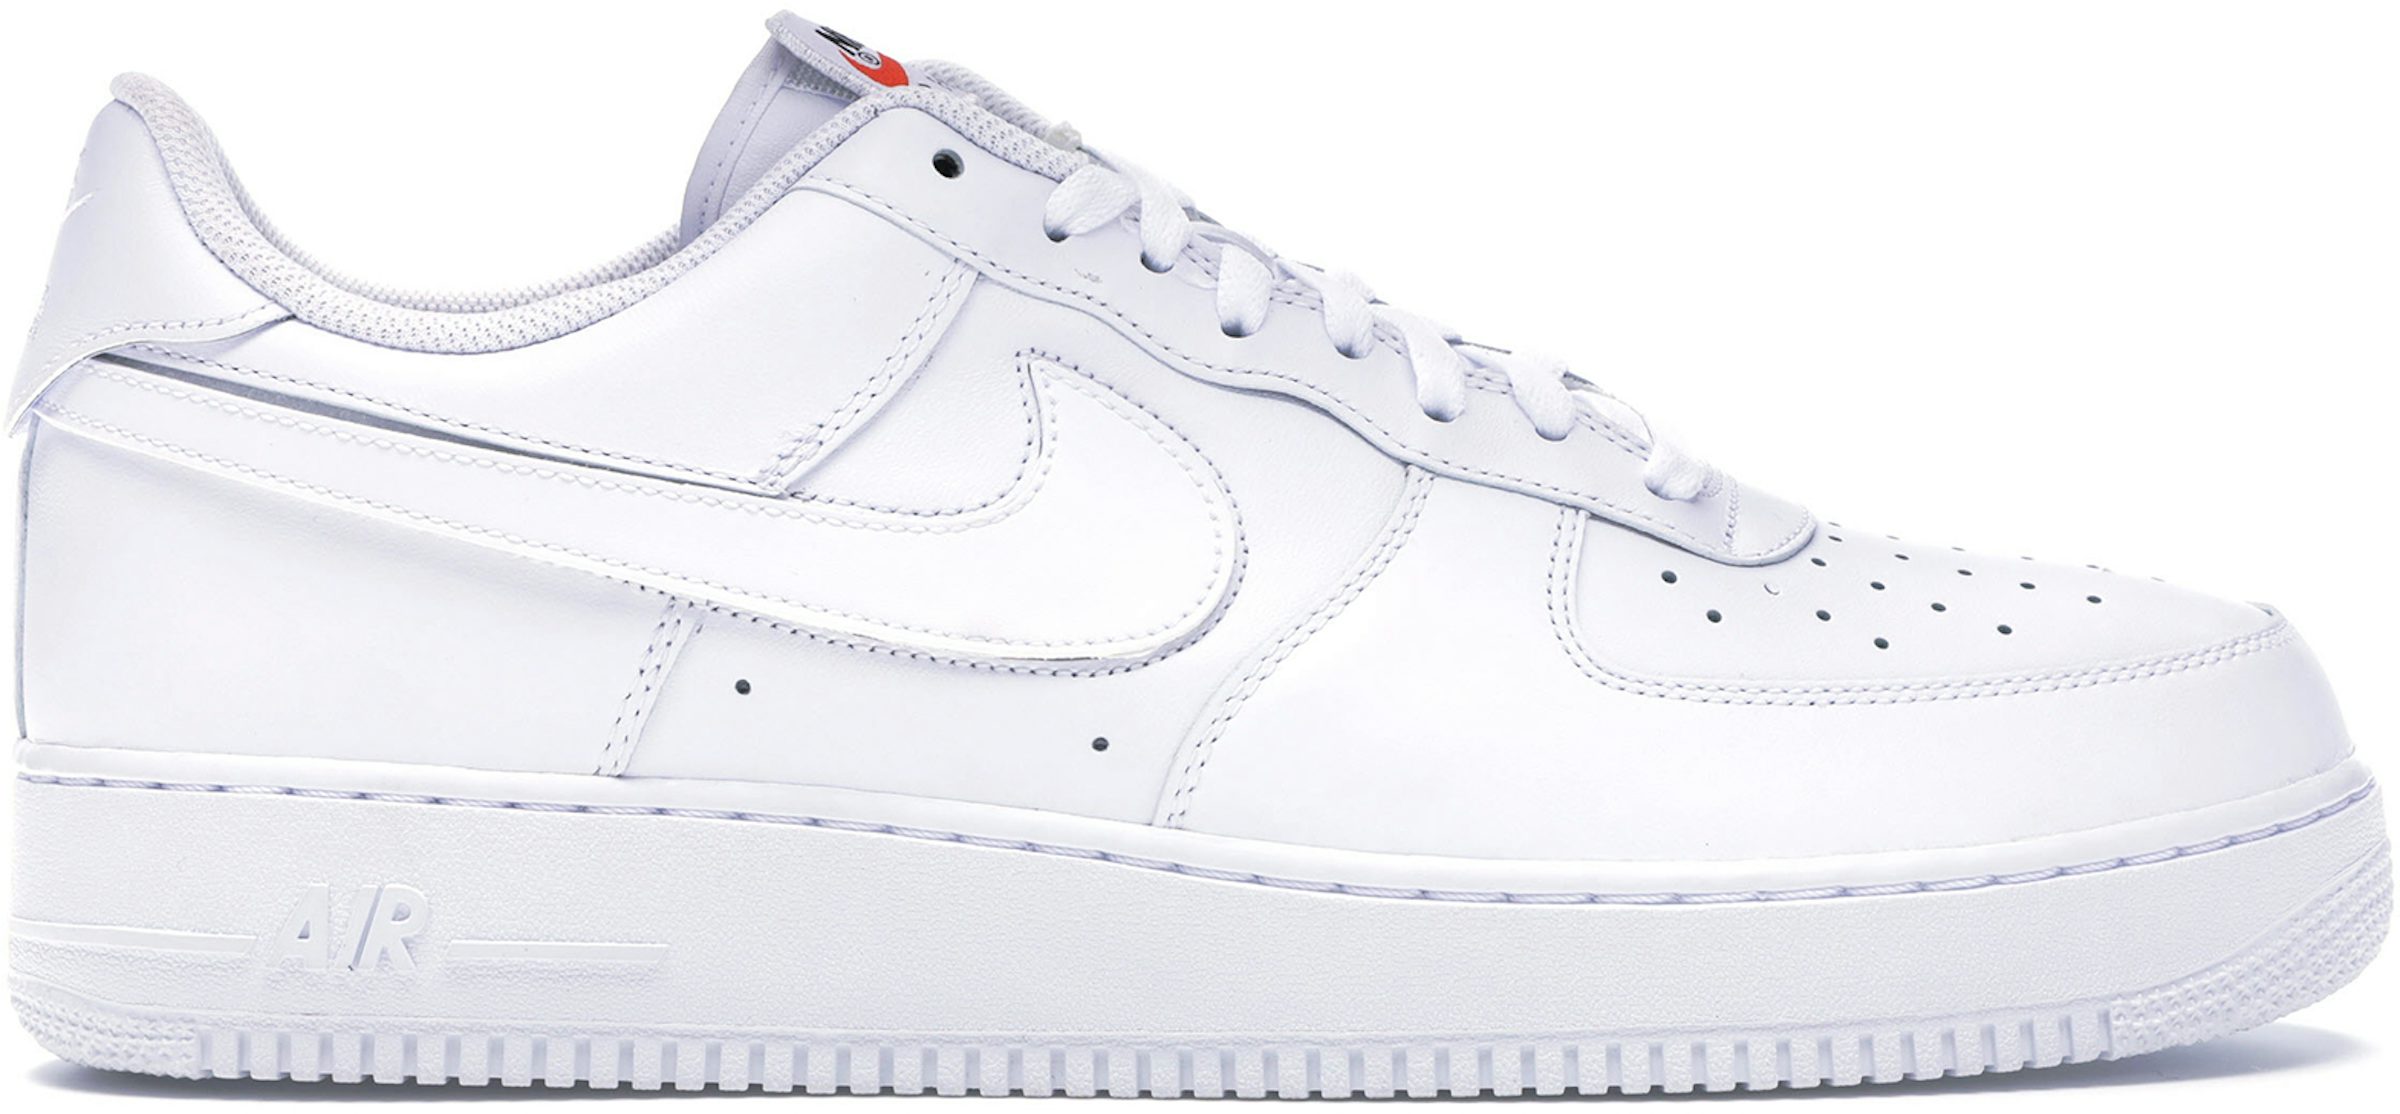 Nike Air Force 1 Low Swoosh Pack All-Star (2018) (White) Men's